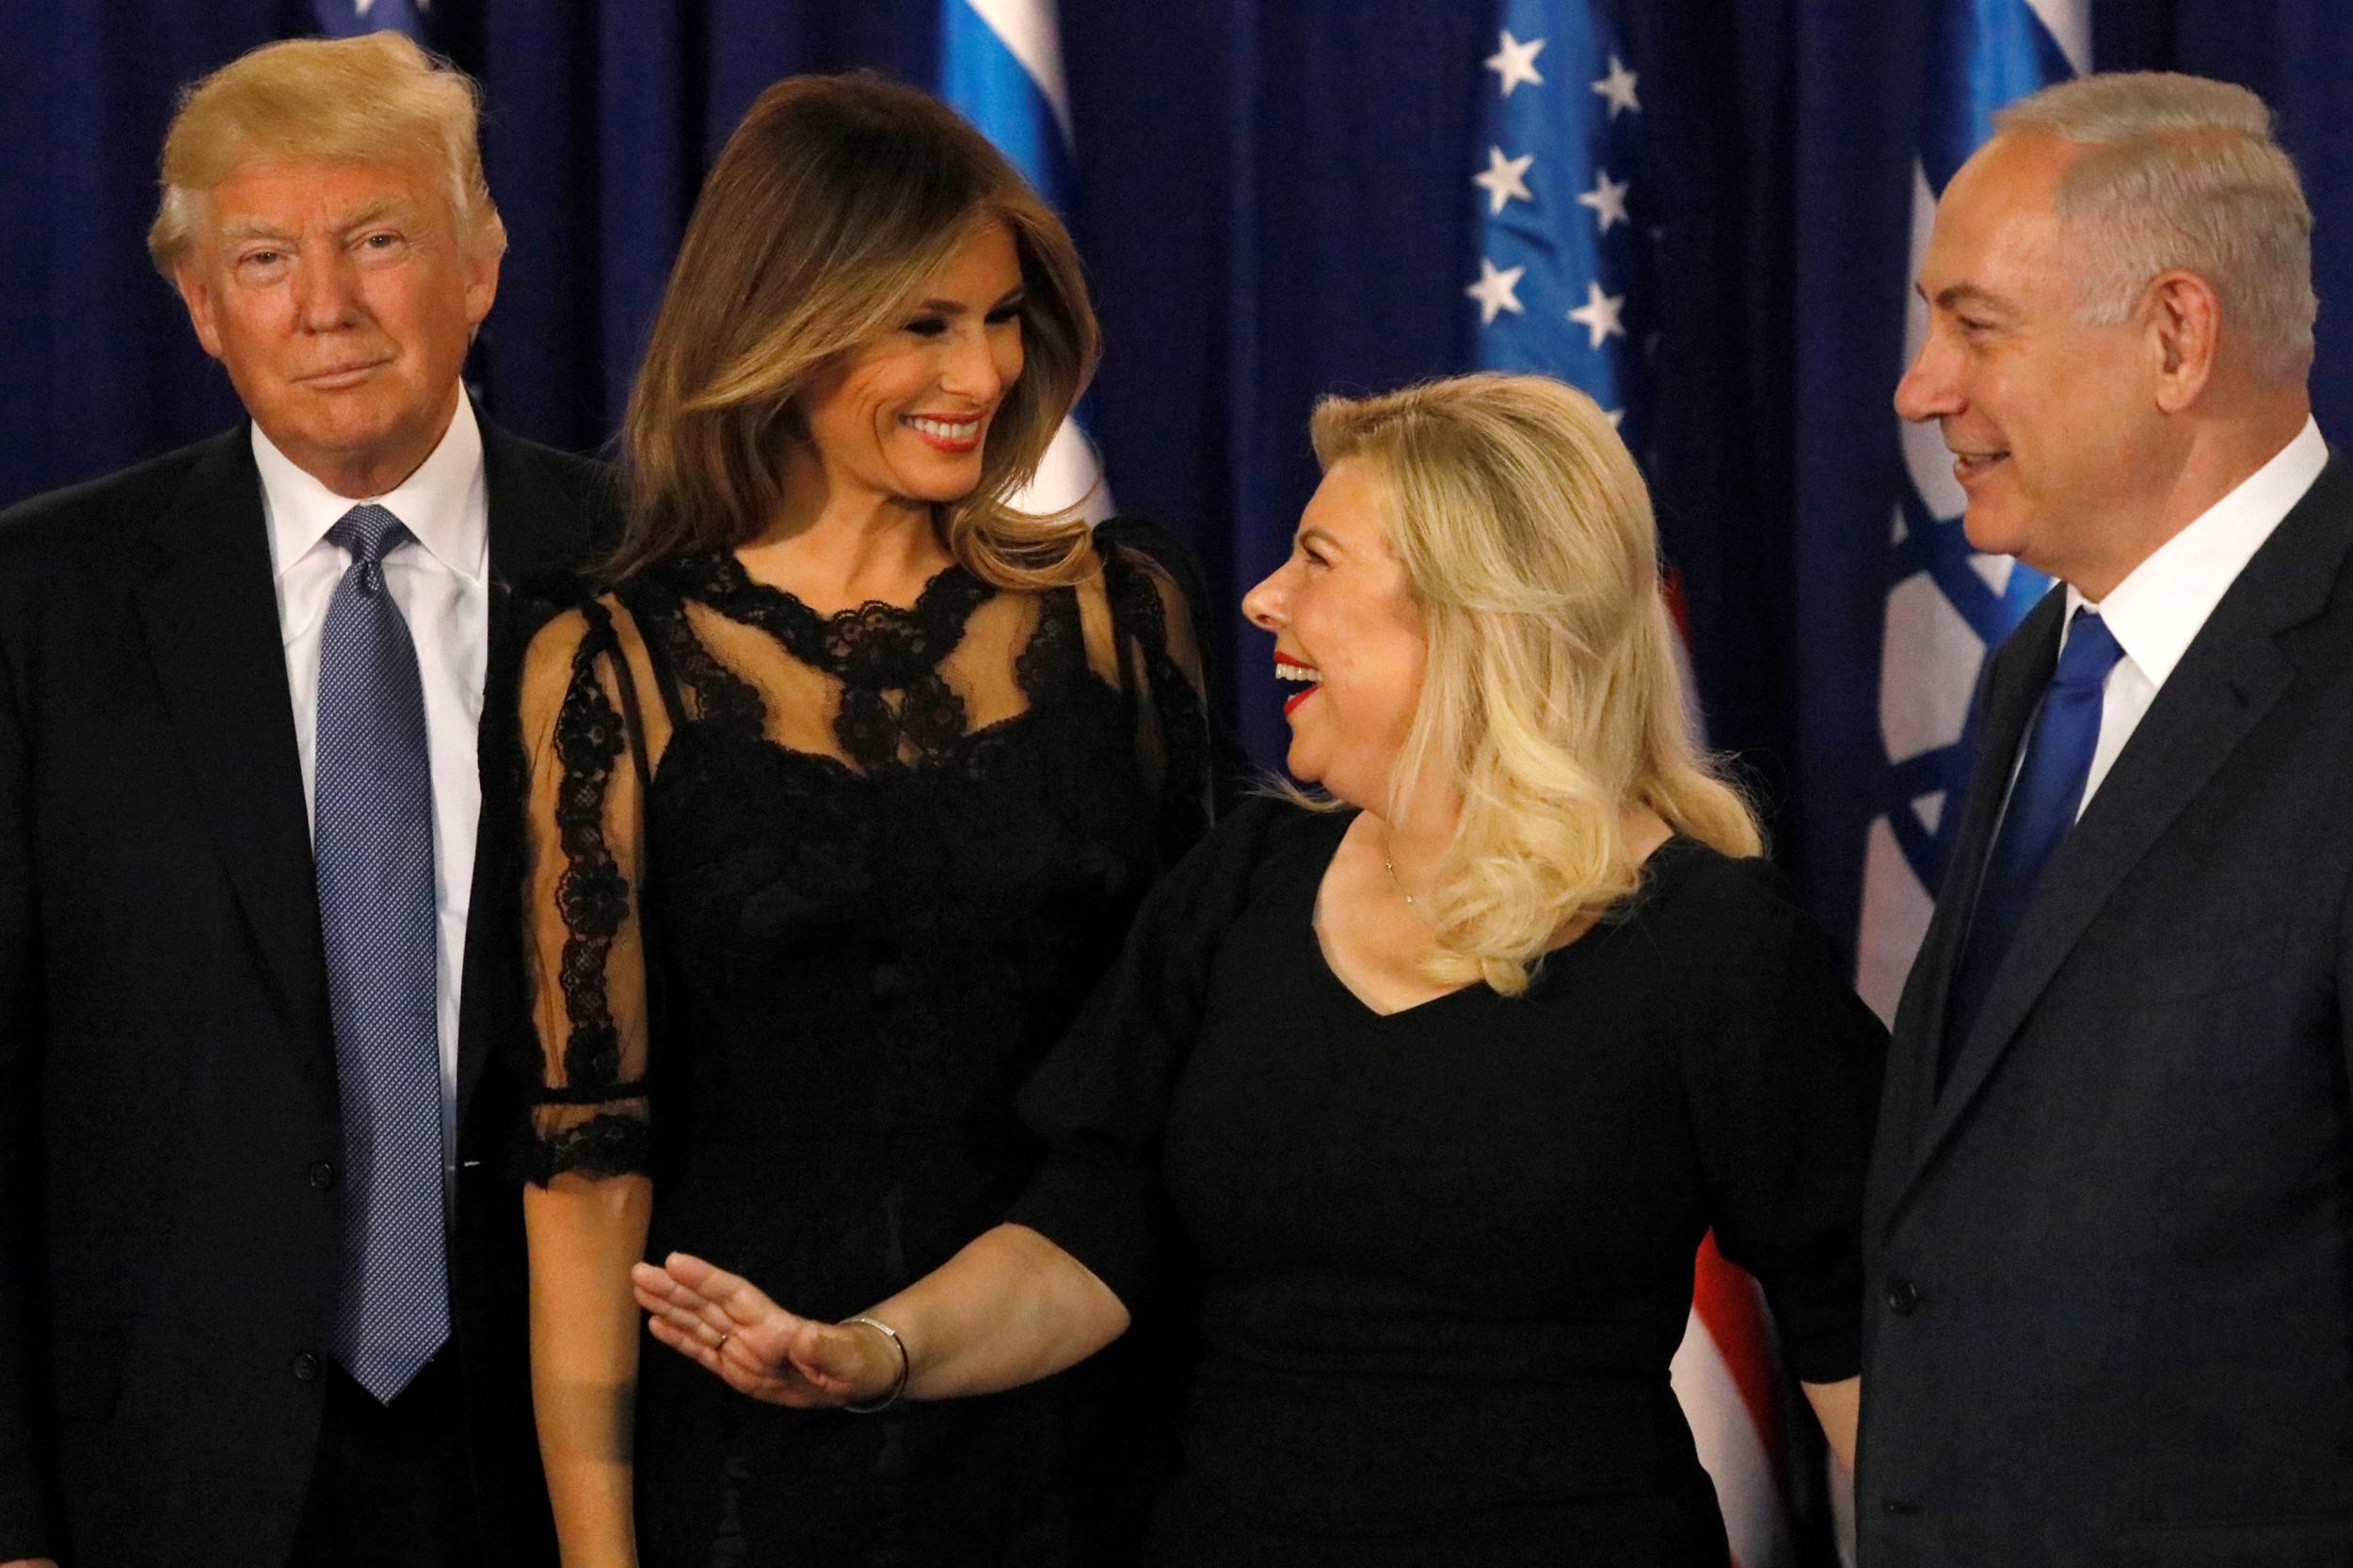 Melania Trump (2nd L) and Sara Netanyahu (2nd R) walk onstage with their respective husbands, US President Donald Trump (L) and Israel's Prime Minister Benjamin Netanyahu (R), before a dinner at the Netanyahus' residence in Jerusalem on 22 May 2017